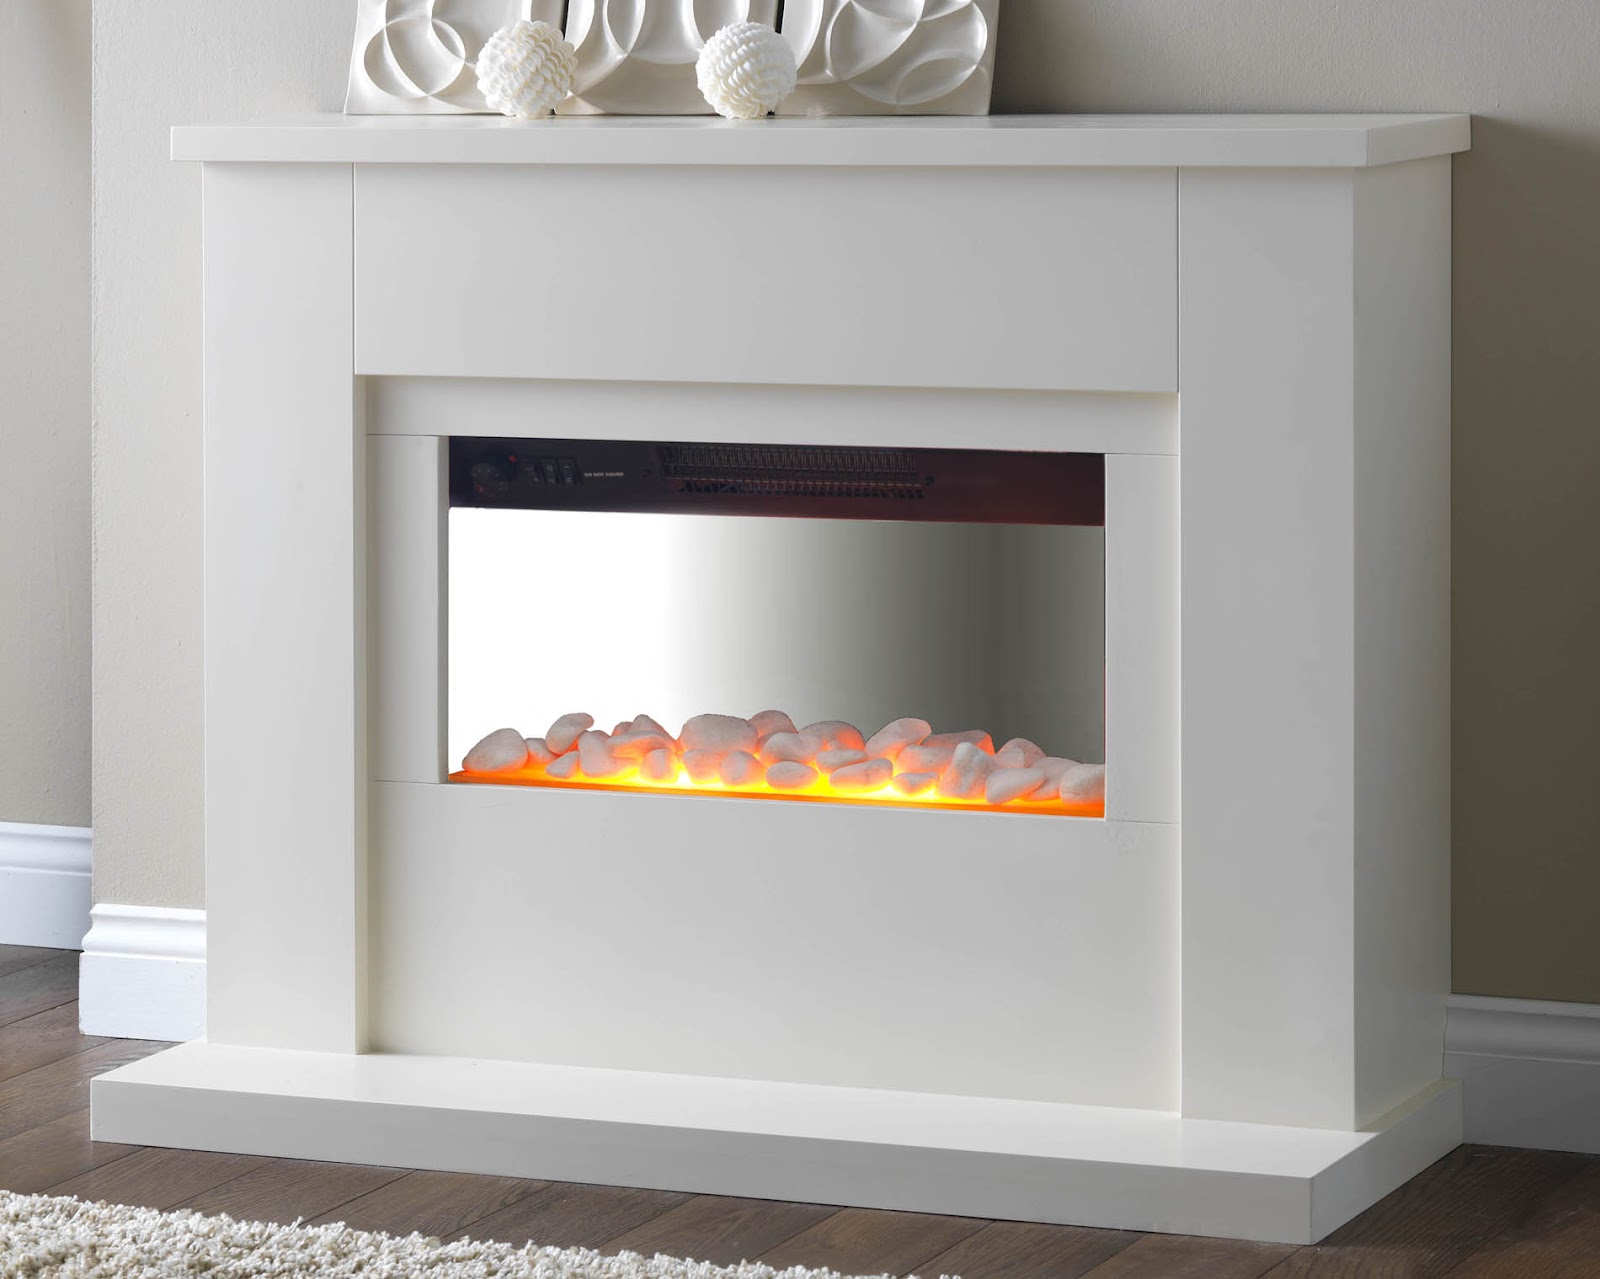 Spitfire Fireplace Heater Awesome White Fireplace Electric Charming Fireplace